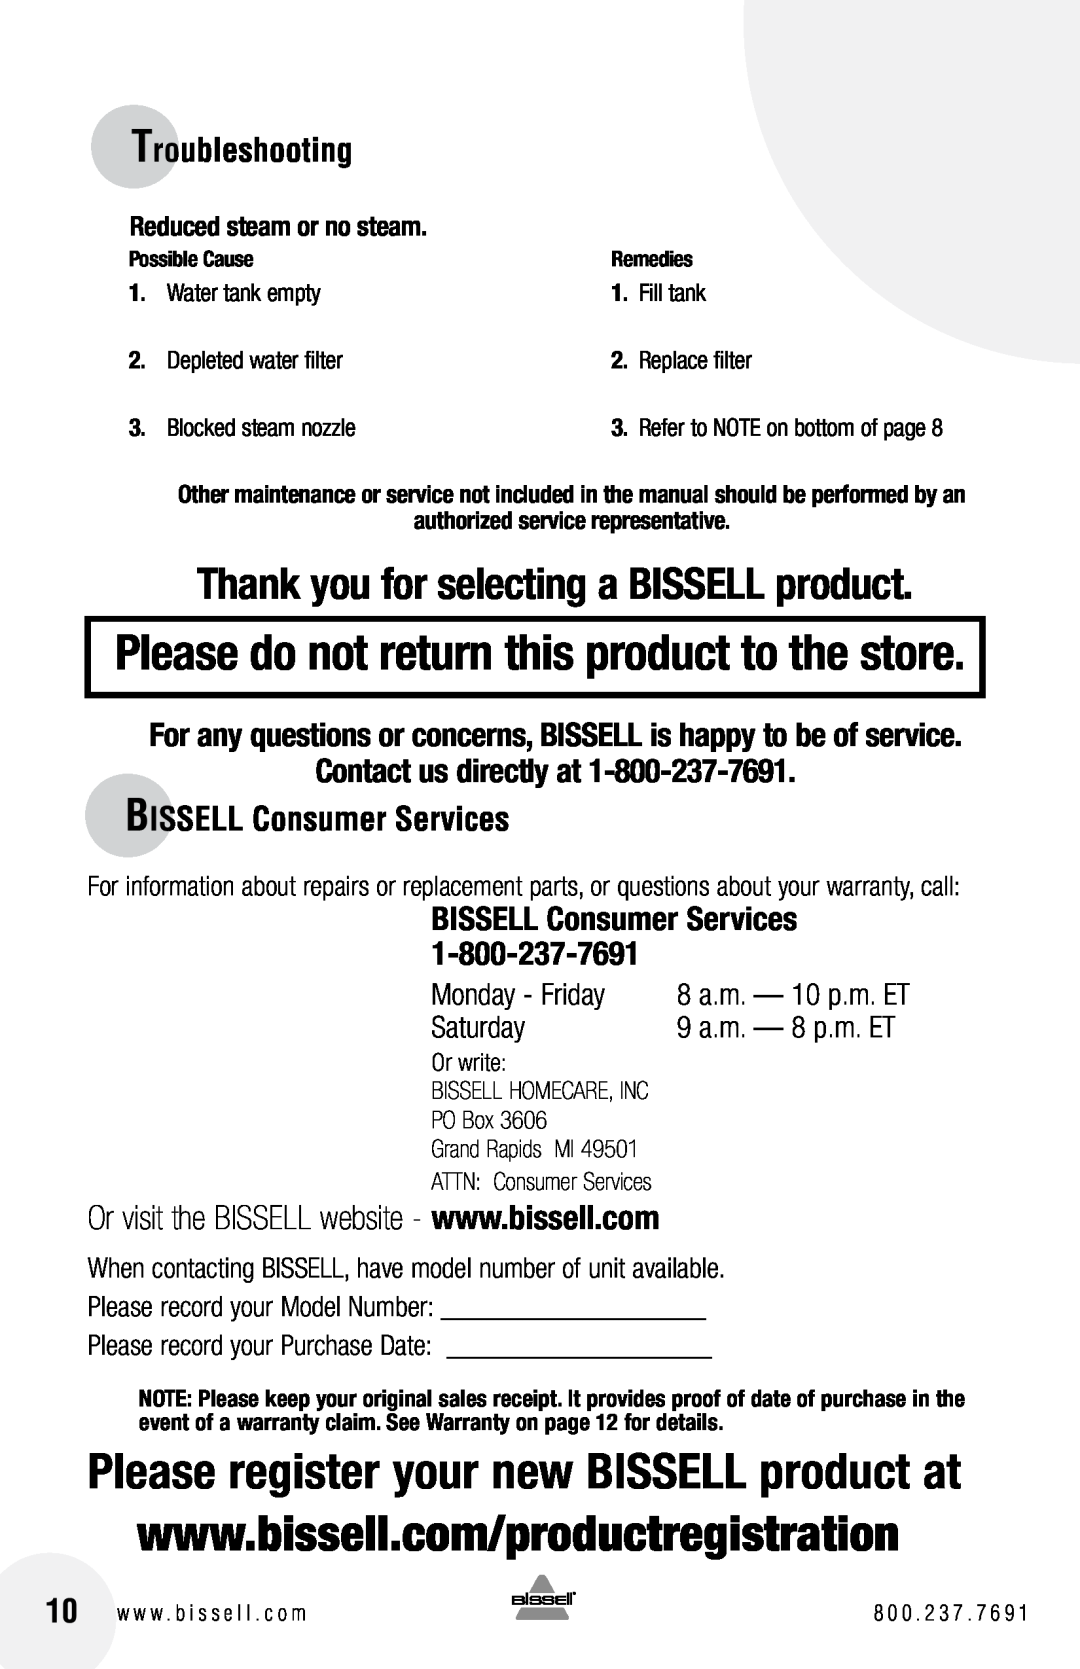 Bissell 31N1 Troubleshooting, Contact us directly at, BISSELL Consumer Services, Thank you for selecting a BISSELL product 